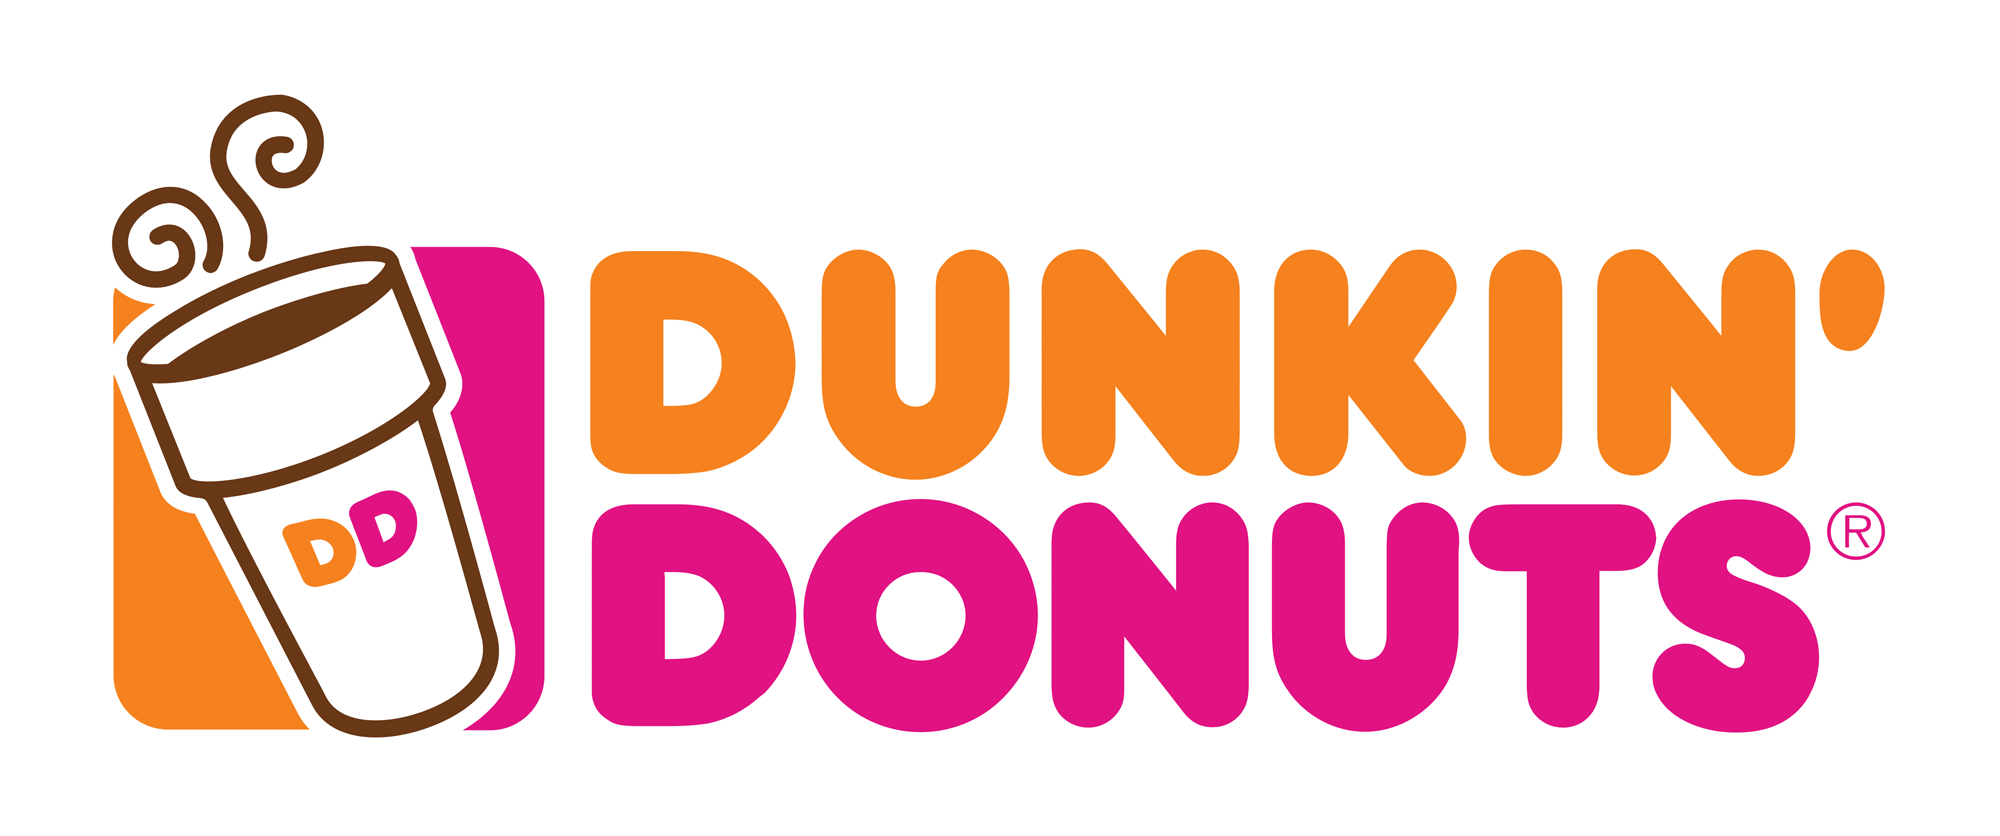 Dunkin Donuts coffee franchise